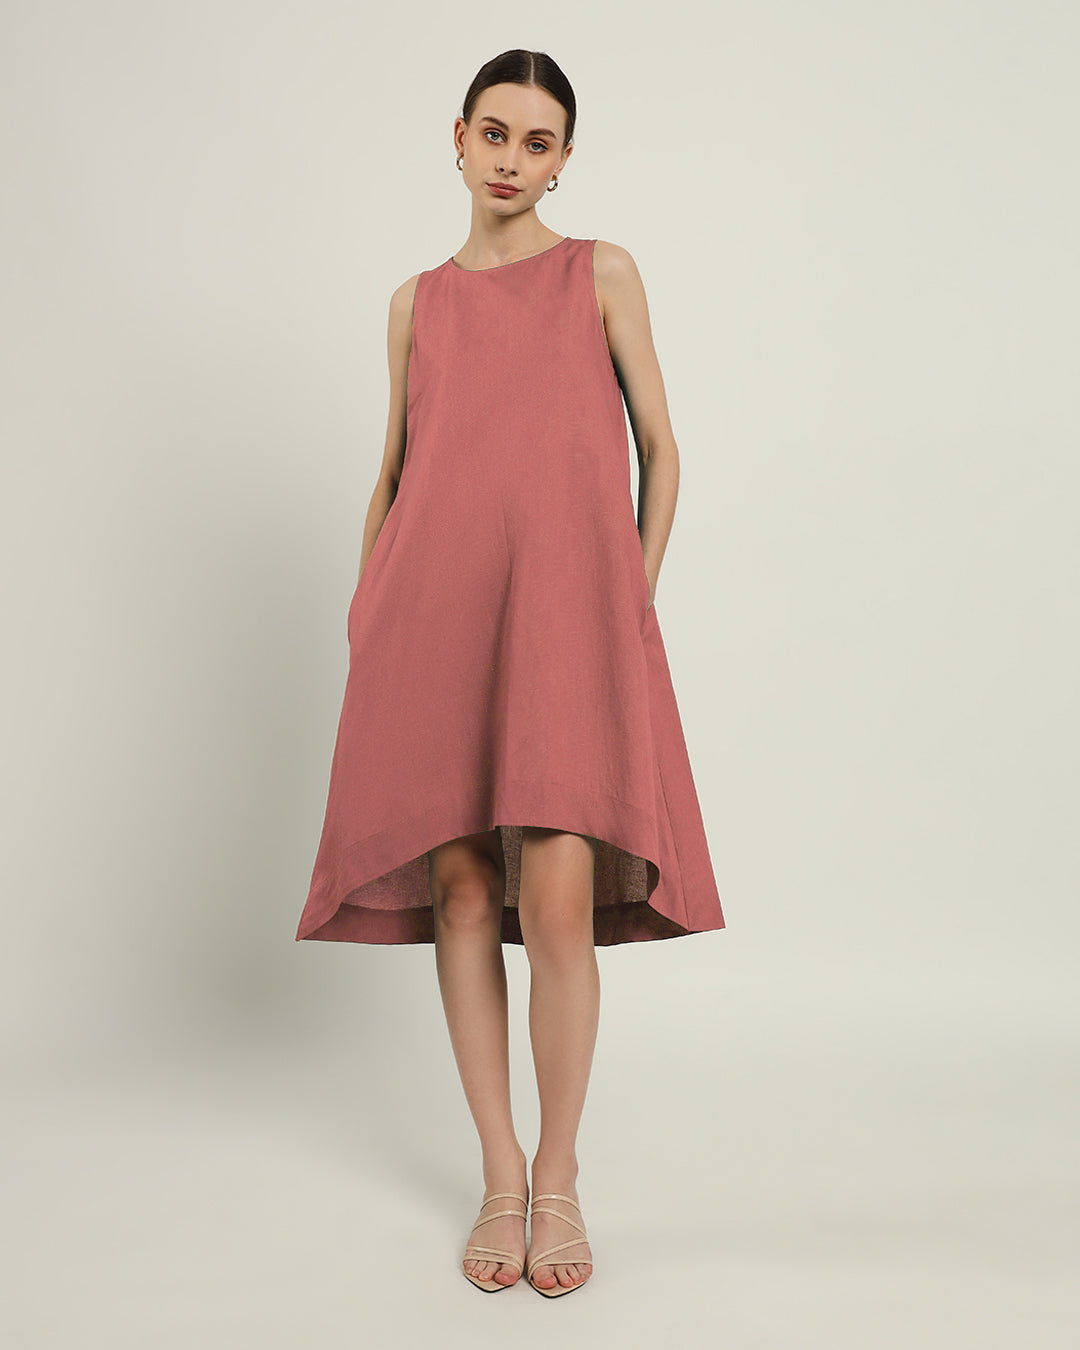 The Odesa Ivory Pink Cotton Dress